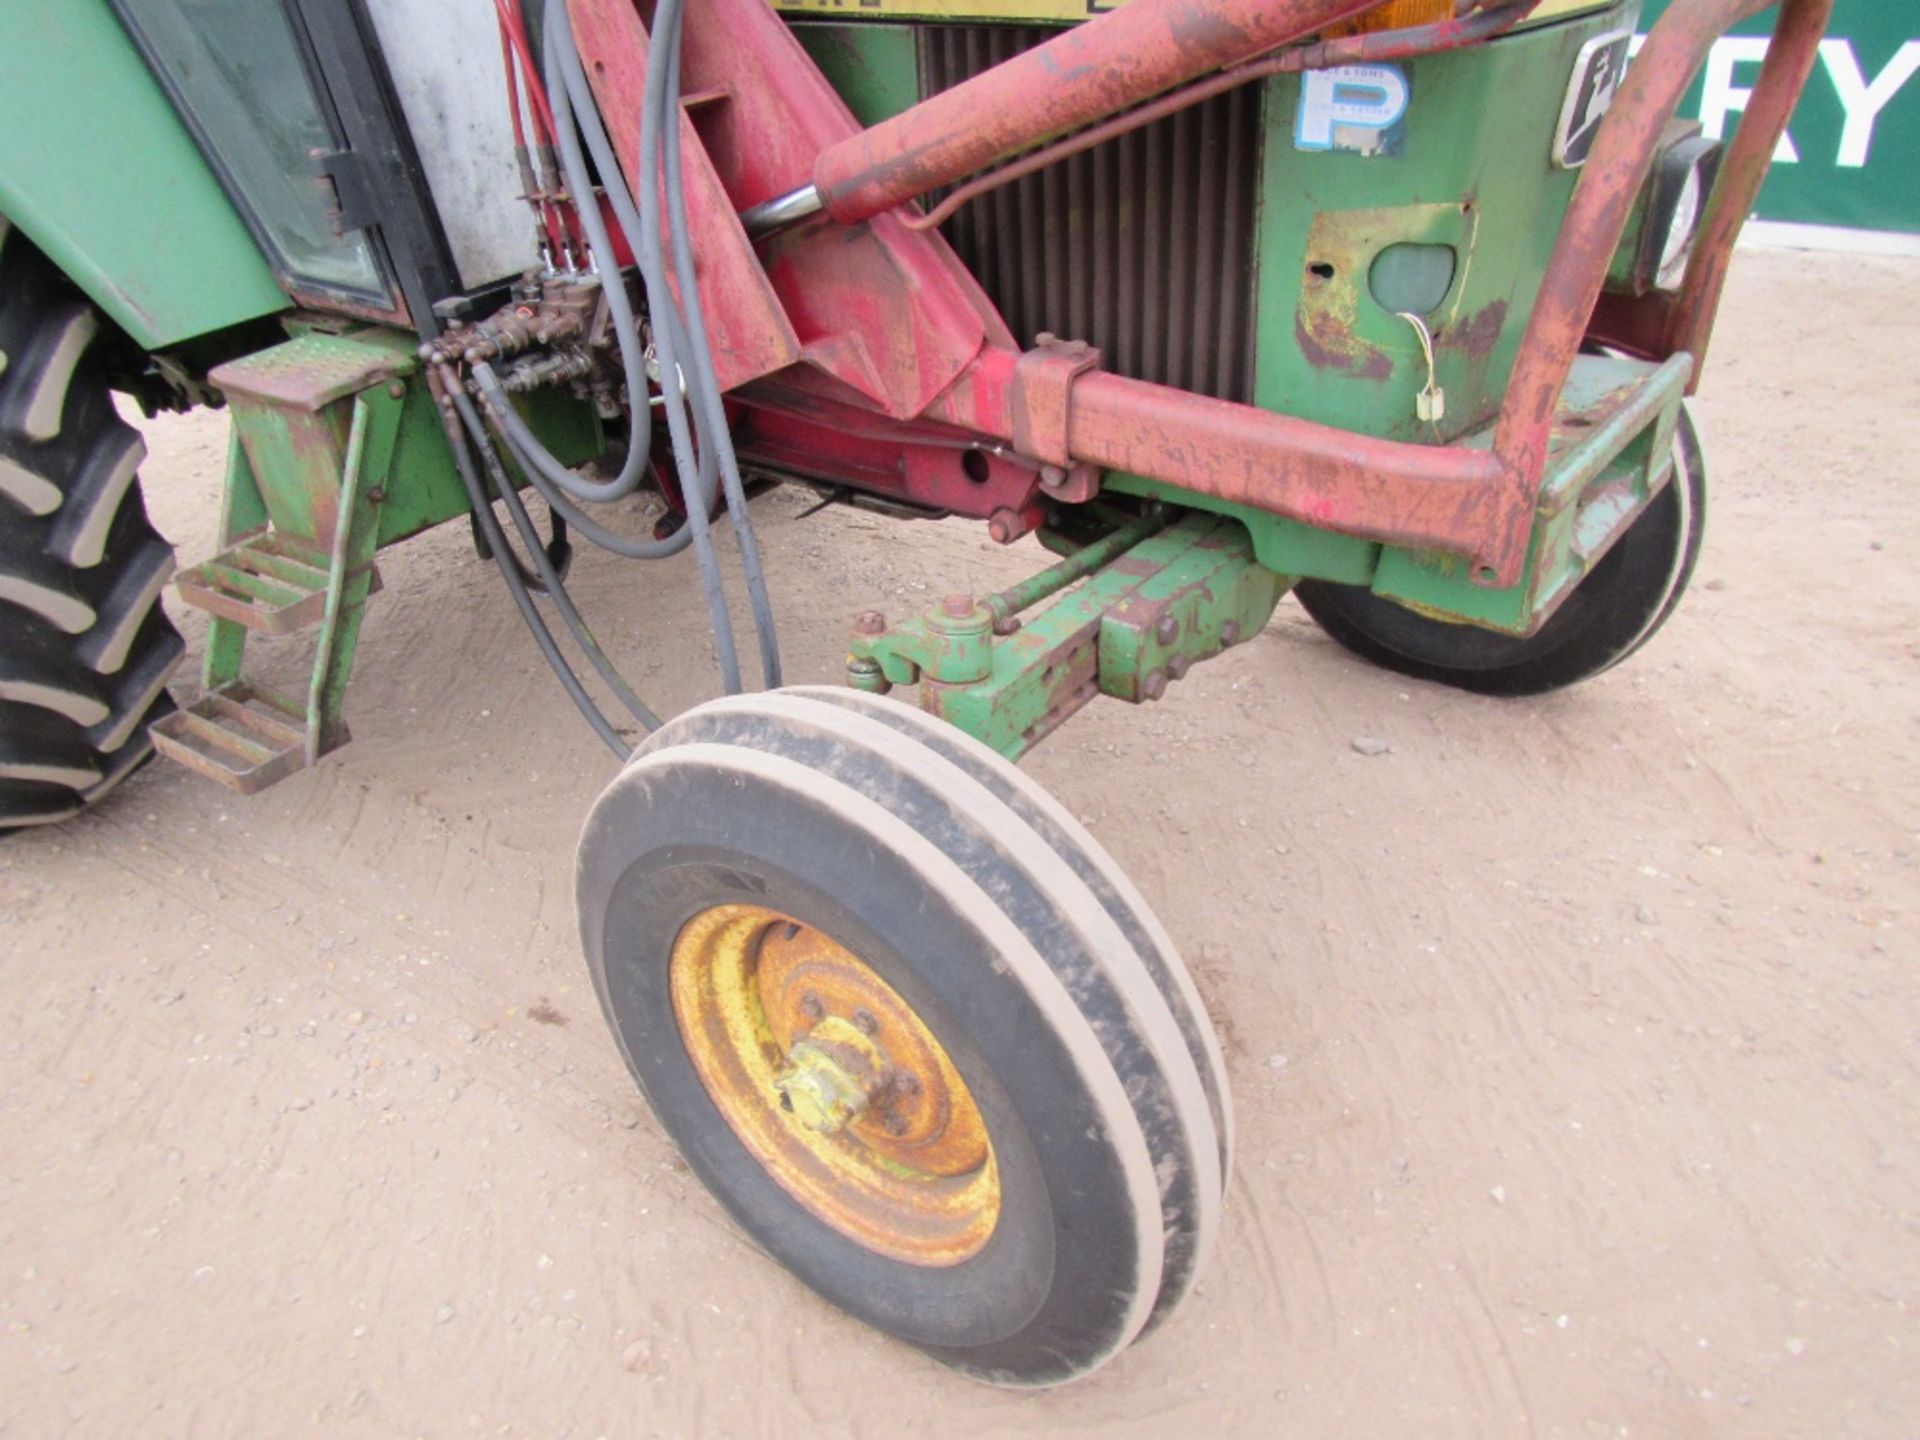 John Deere 3040 4wd Tractor. Subject to TOTAL LOSS INSURANCE CLAIM Reg. No. A122 VFE - Image 4 of 12